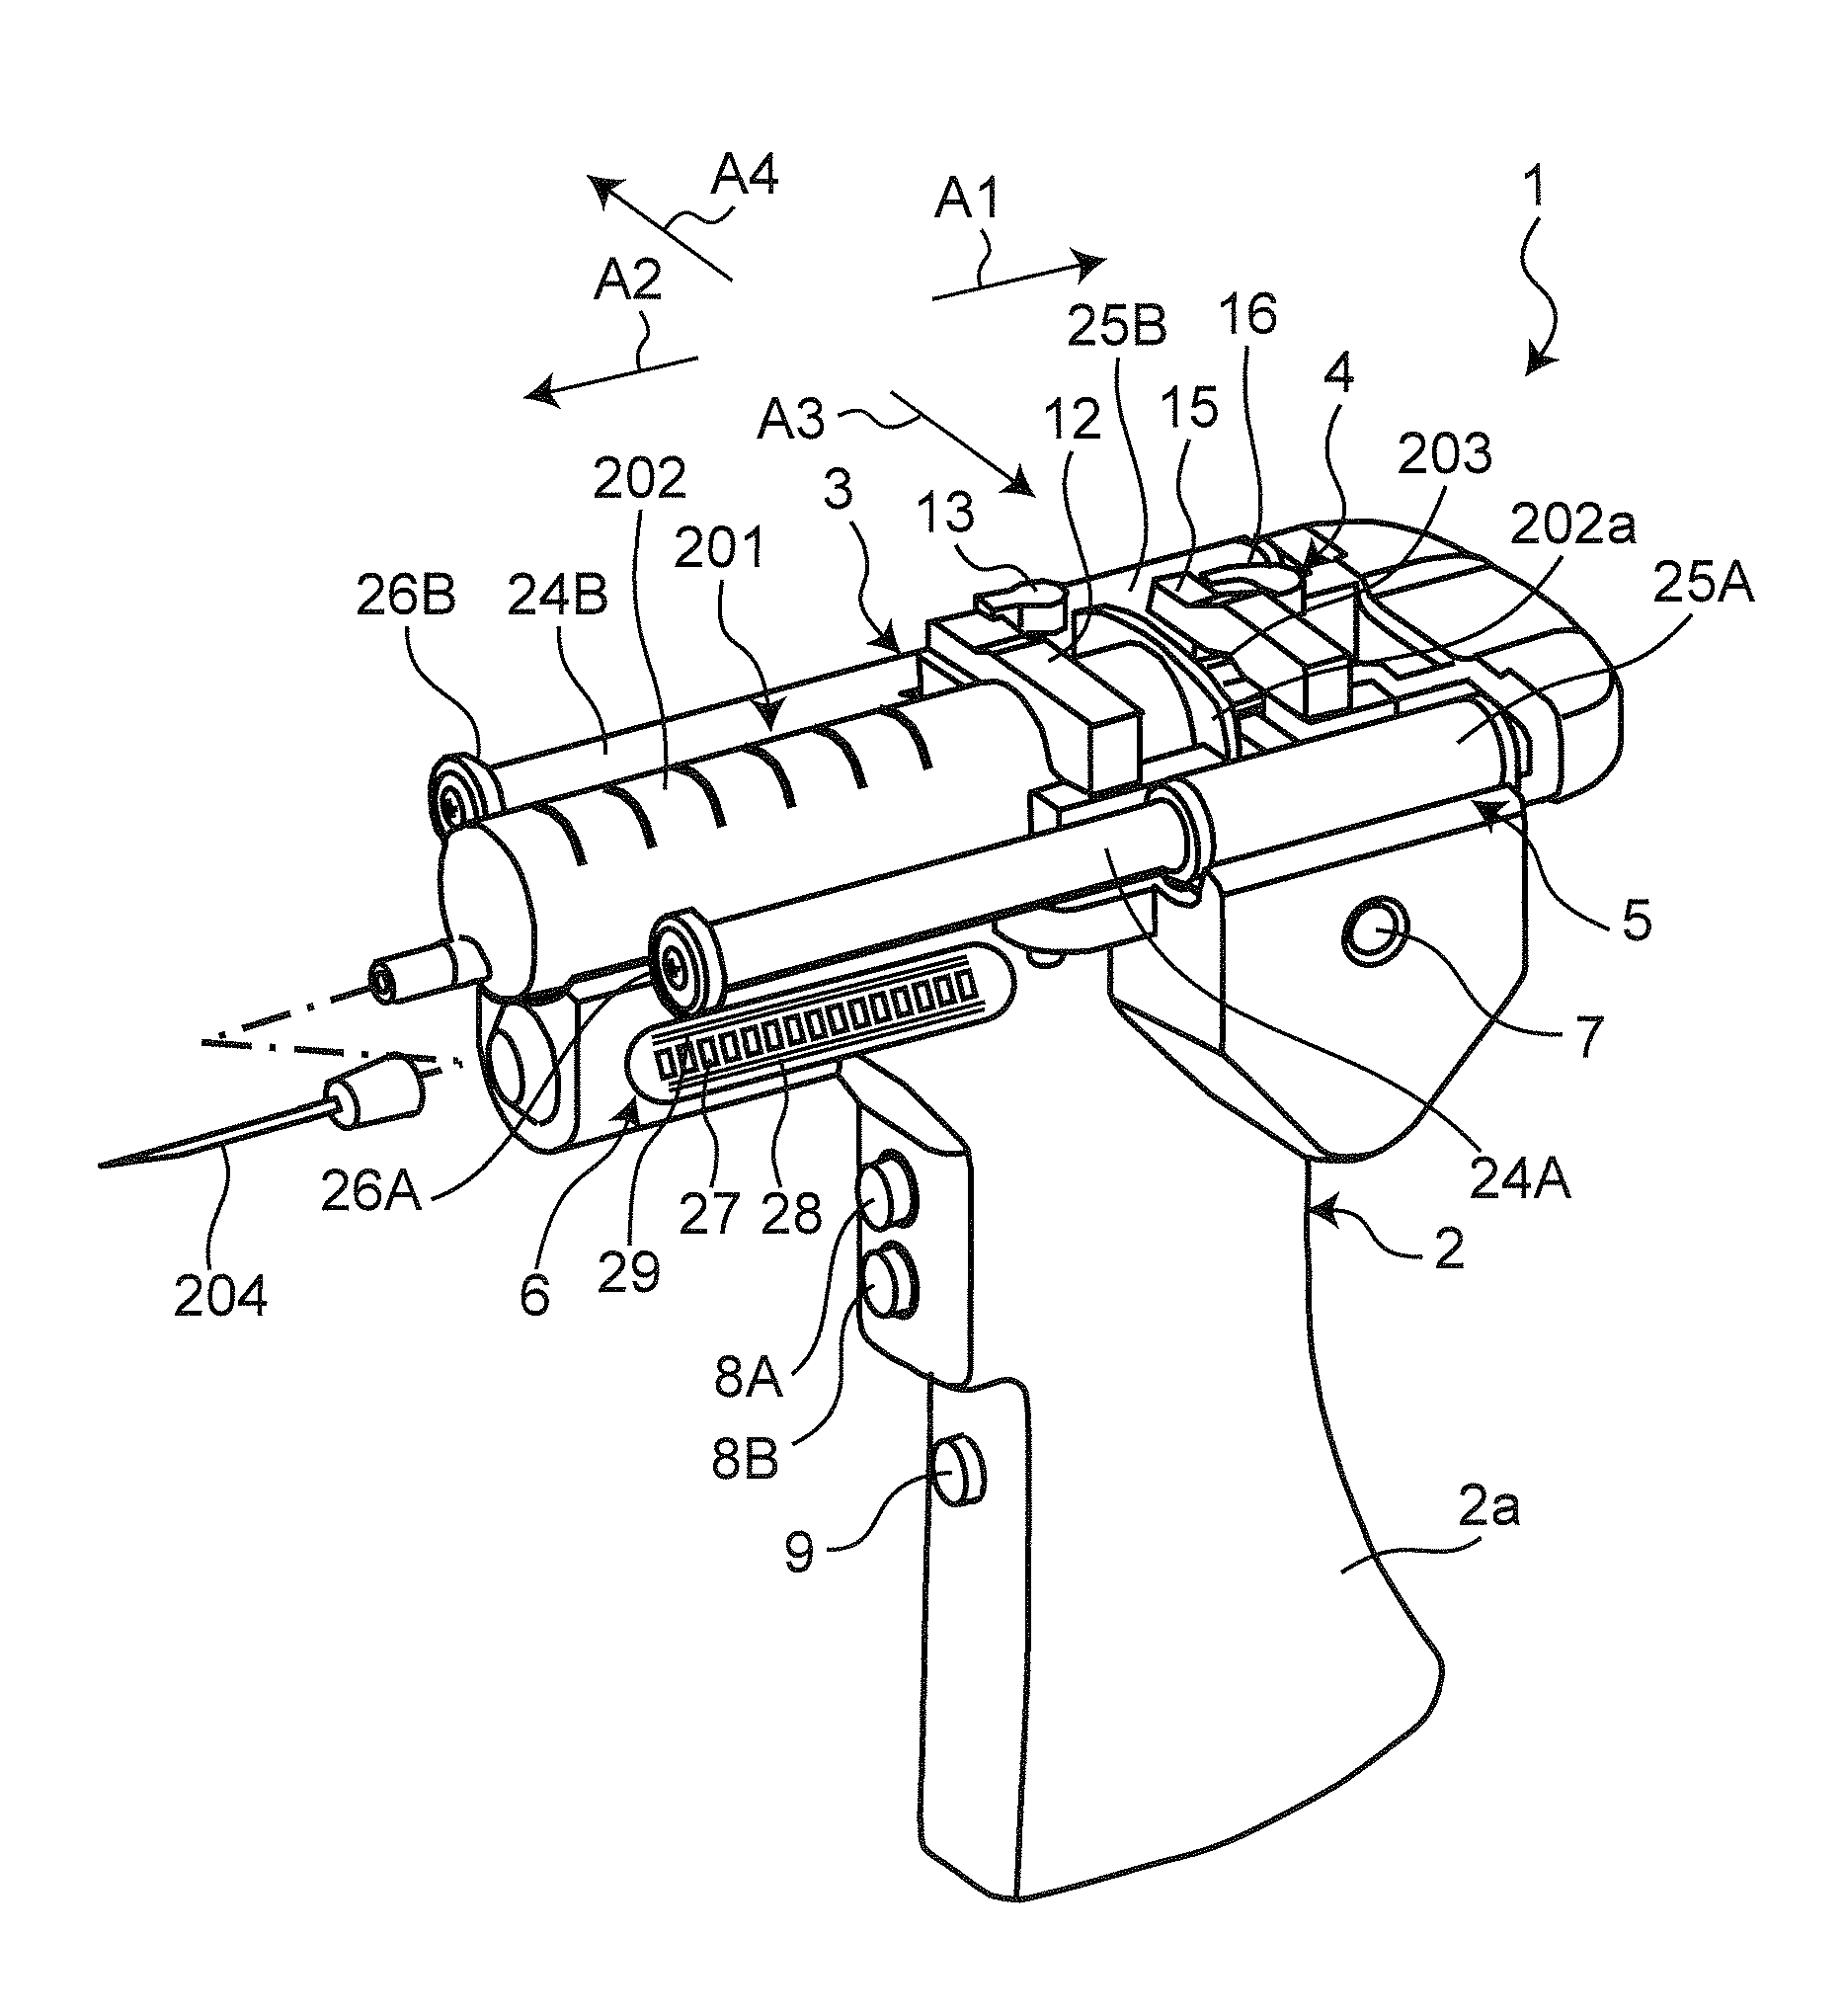 Syringe drive device and medication dispensing apparatus